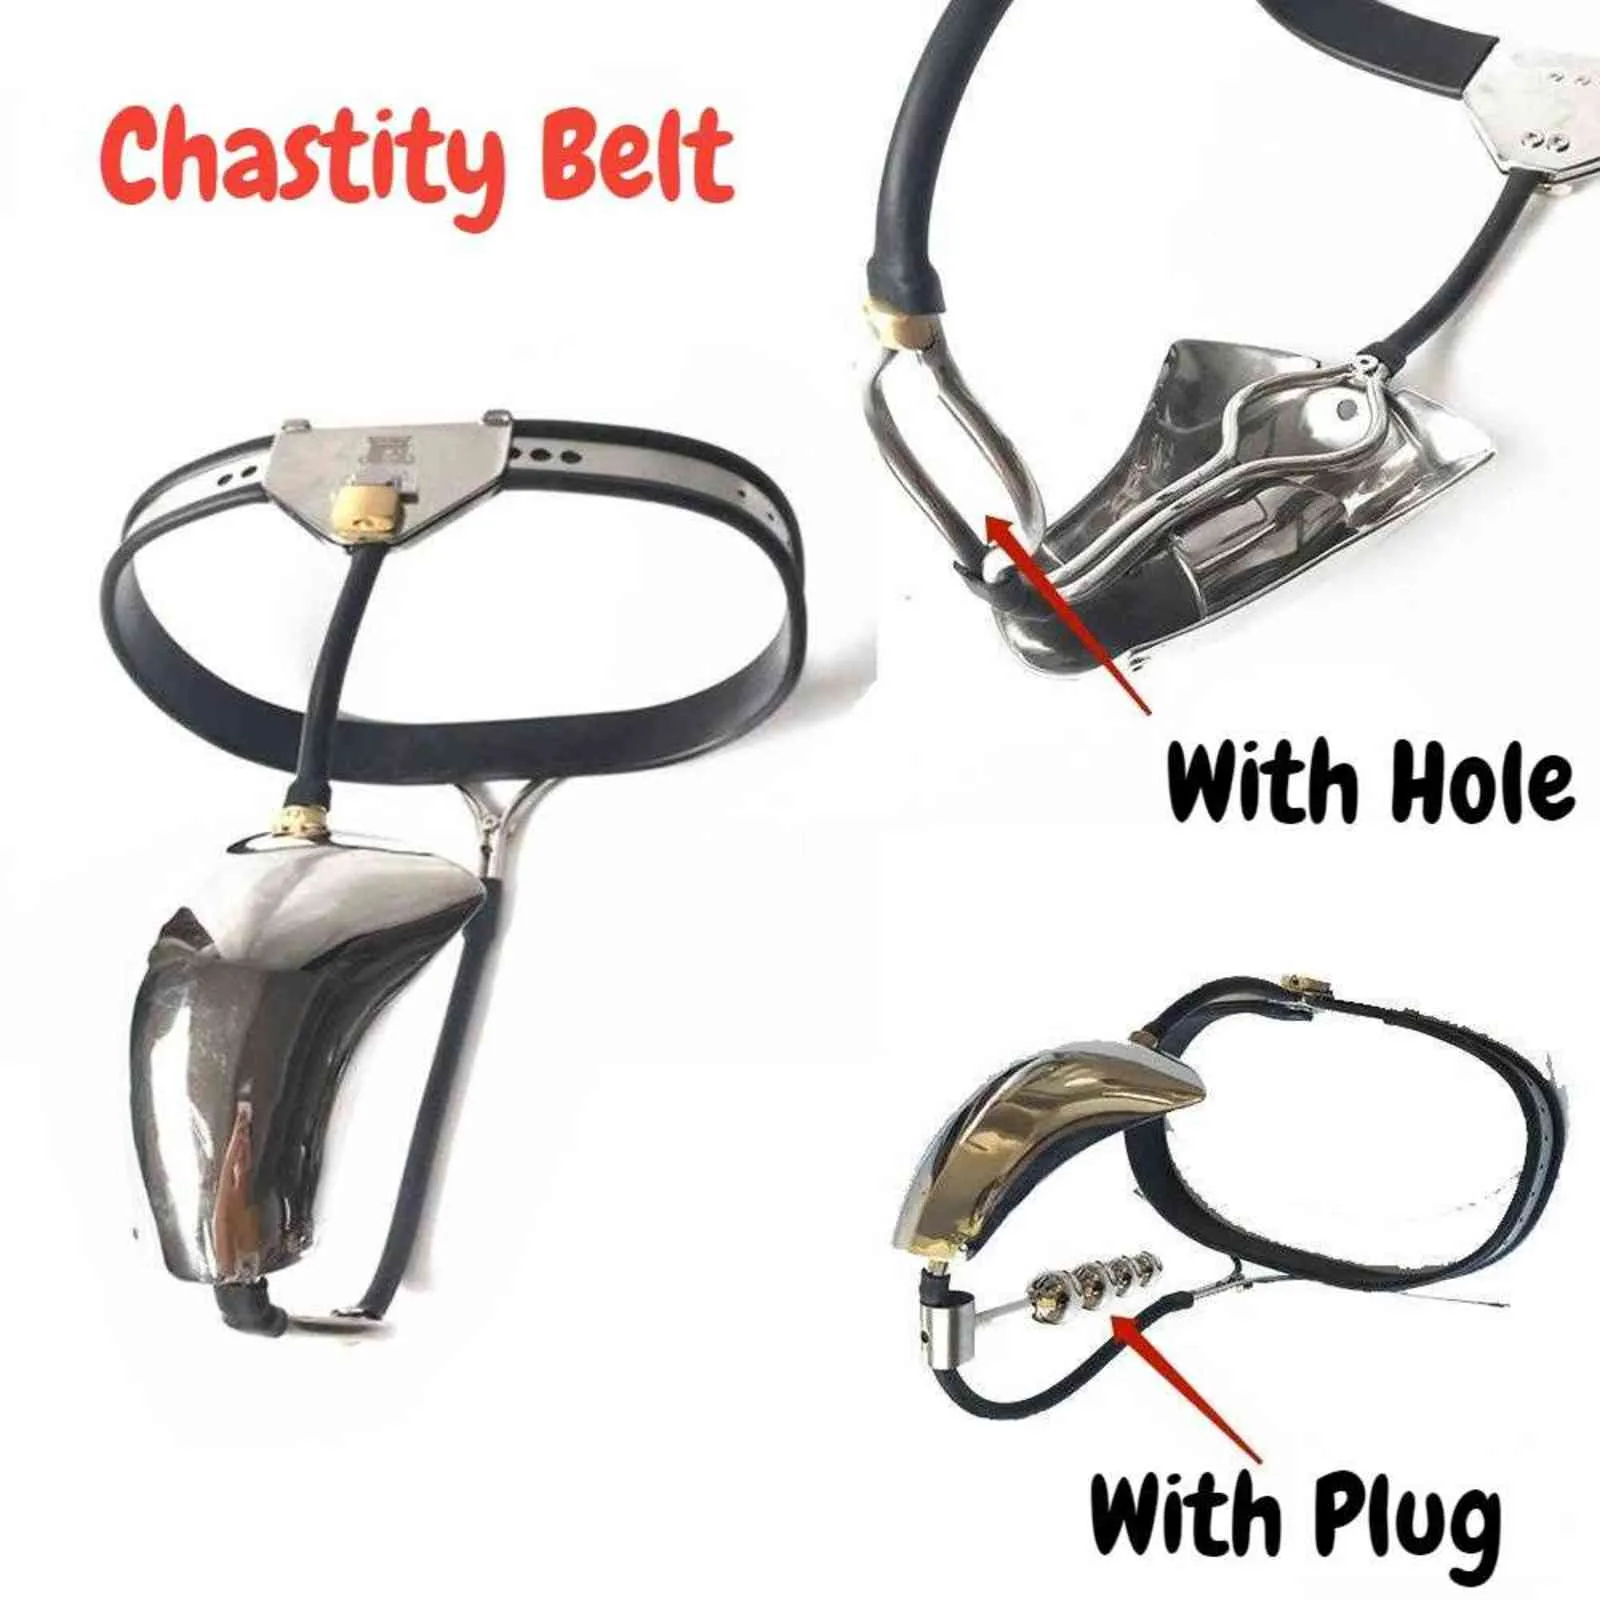 NXYCockrings Male Chastity Device Stainless Steel Belt With Big Scrotum Groove Cage Lockable Invisible Bird Bondage Pants Plug or Hole 1124